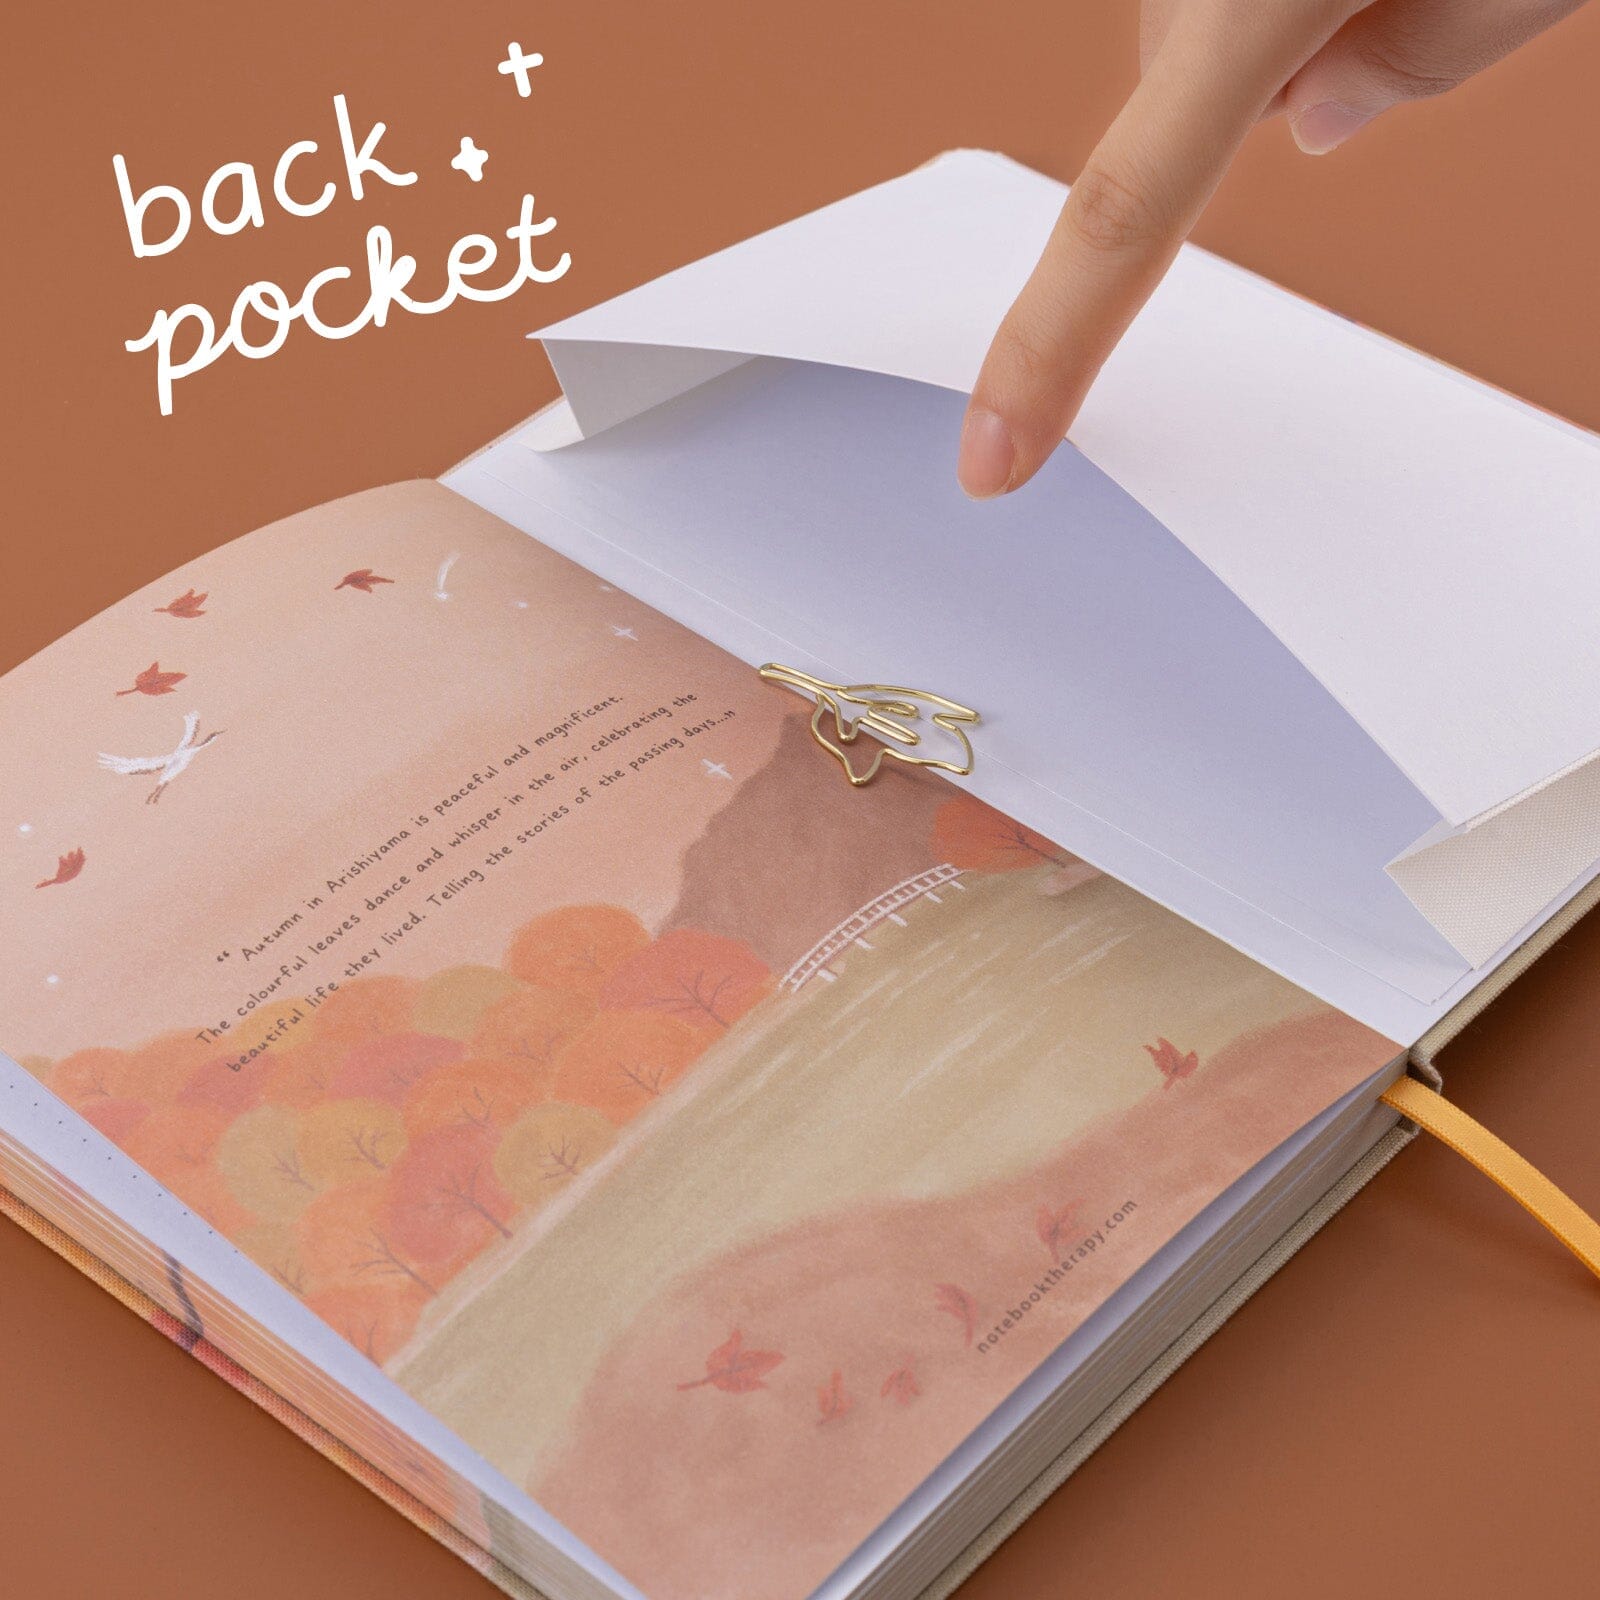 Rocketbook Everlast - The only notebook you'll ever need! - Autumn's Mummy